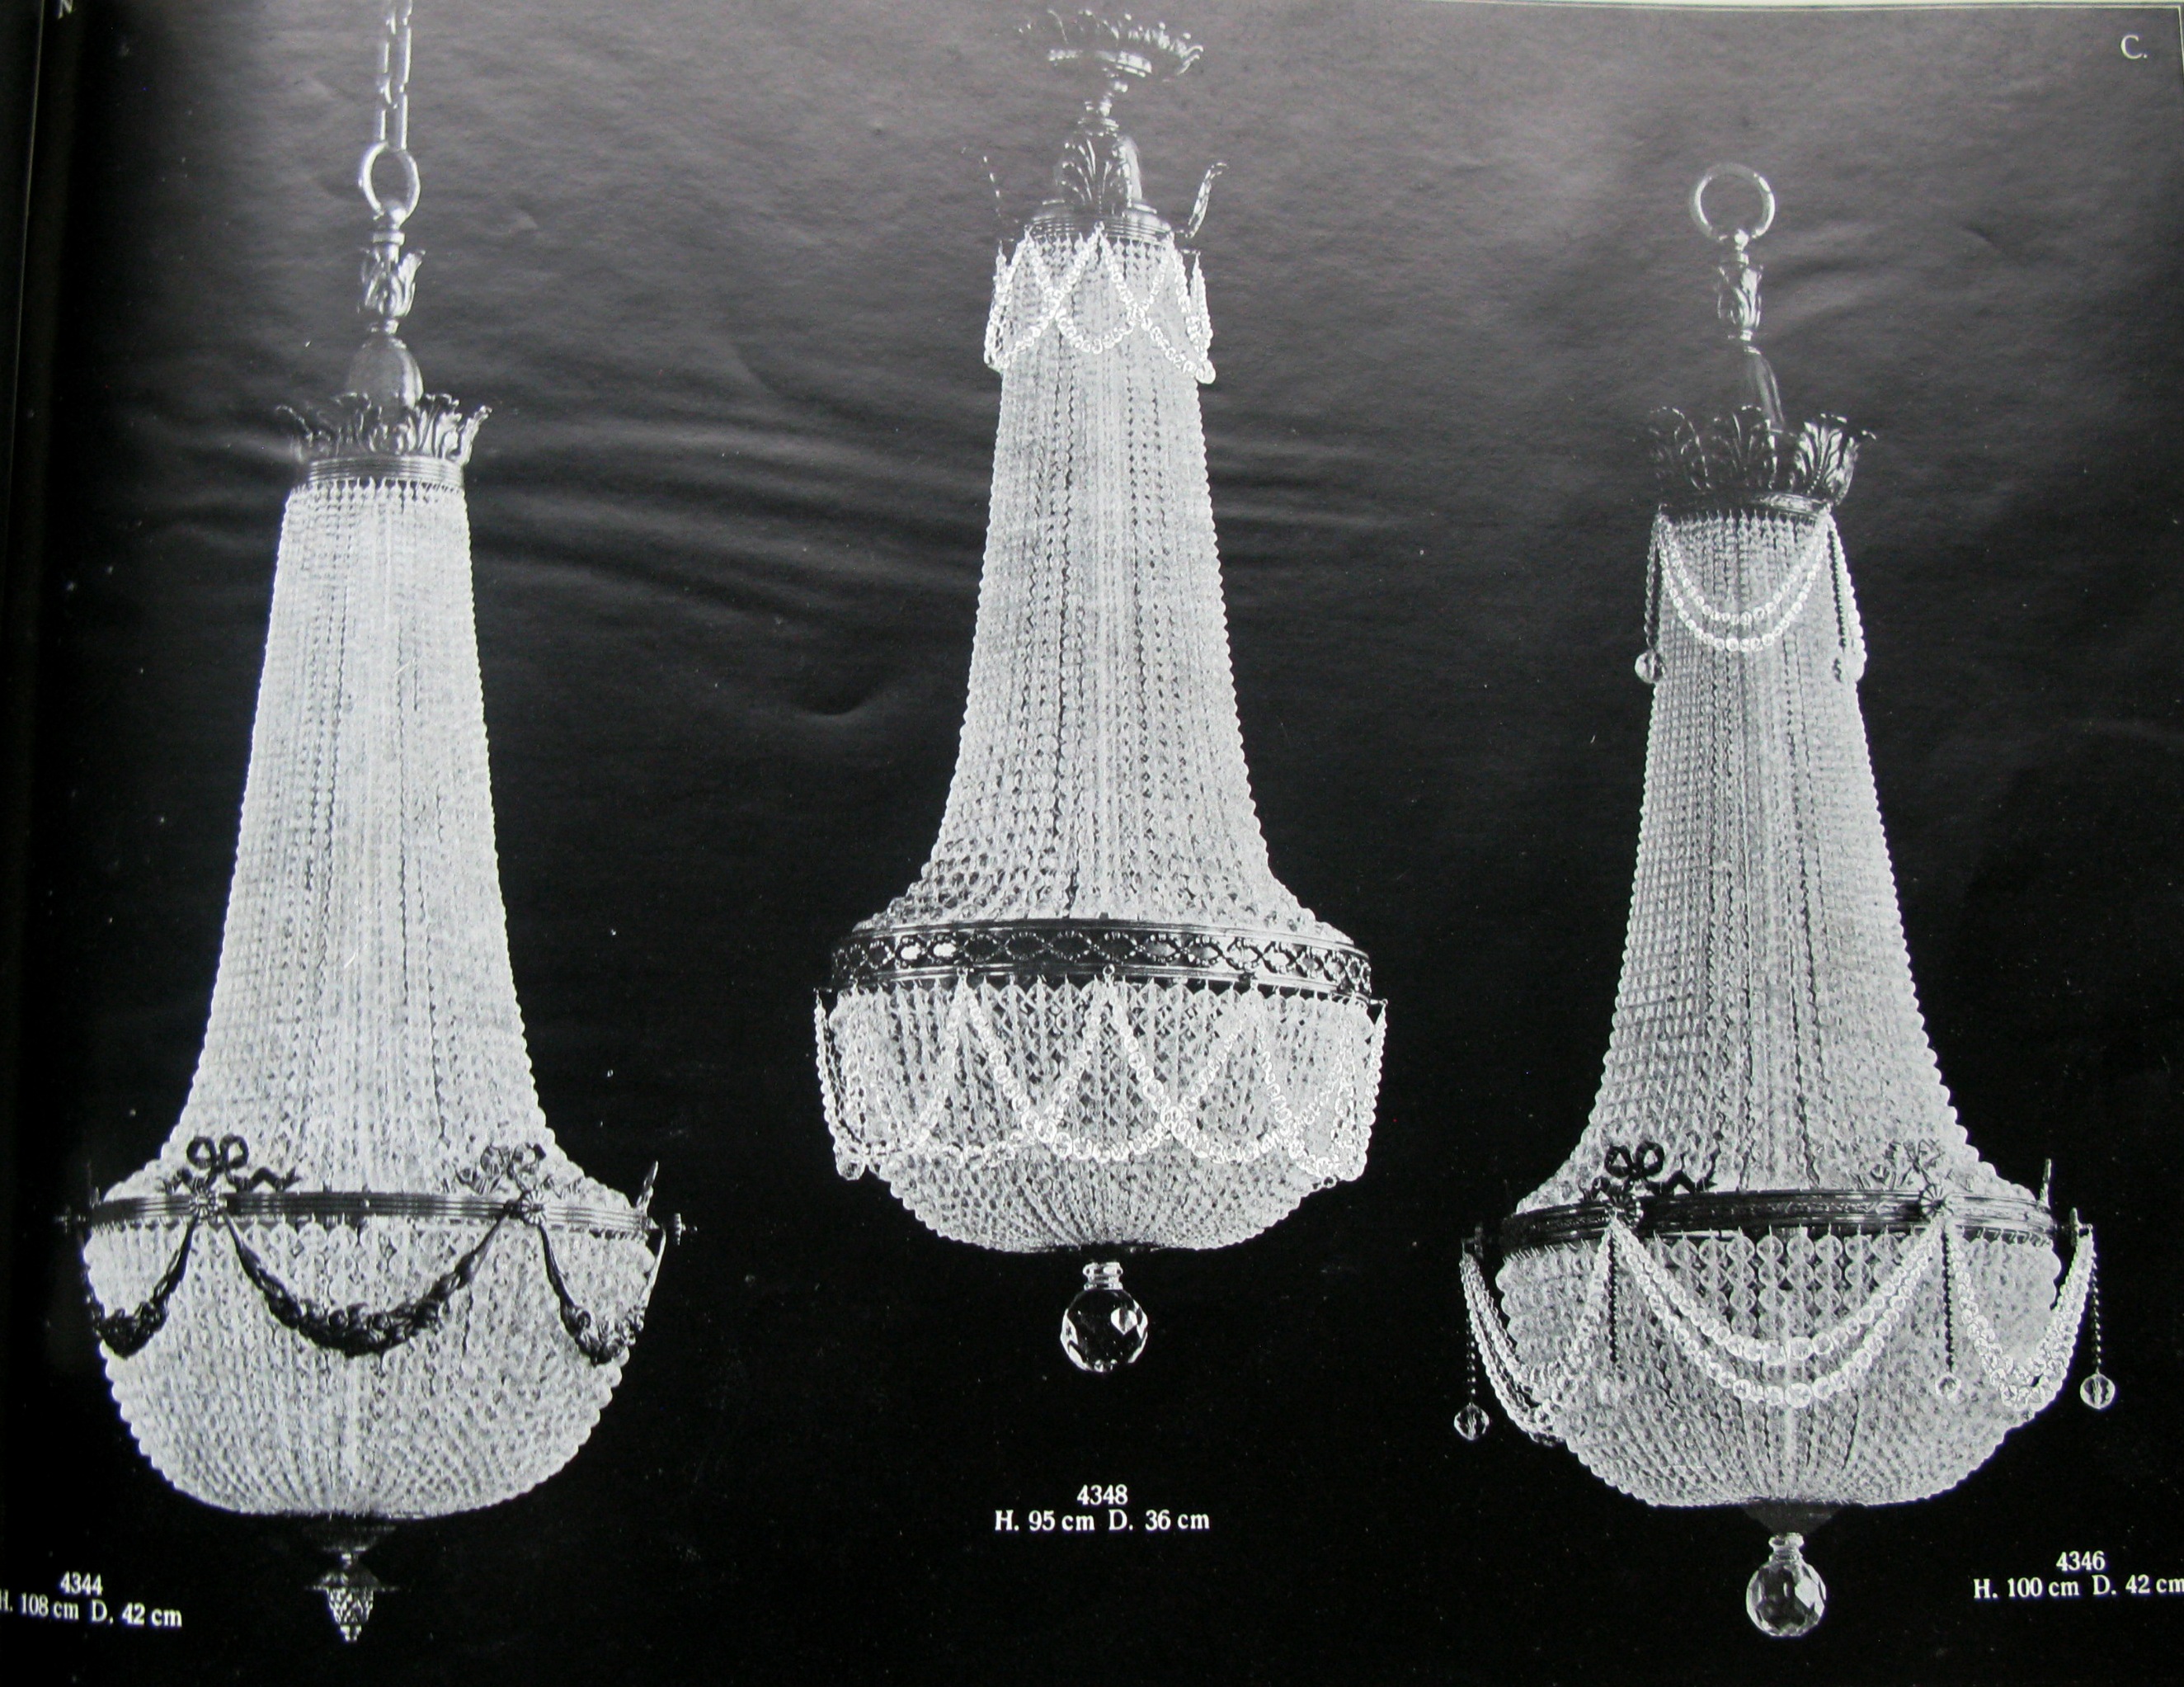 Neumann & Co. The chandeliers from the catalogue of 1928 of the Ebersbach/Saxony factory. Reproduced from: Crystallerie und Beleuchtungskorper N.C.E.S., 1928, p. 370.